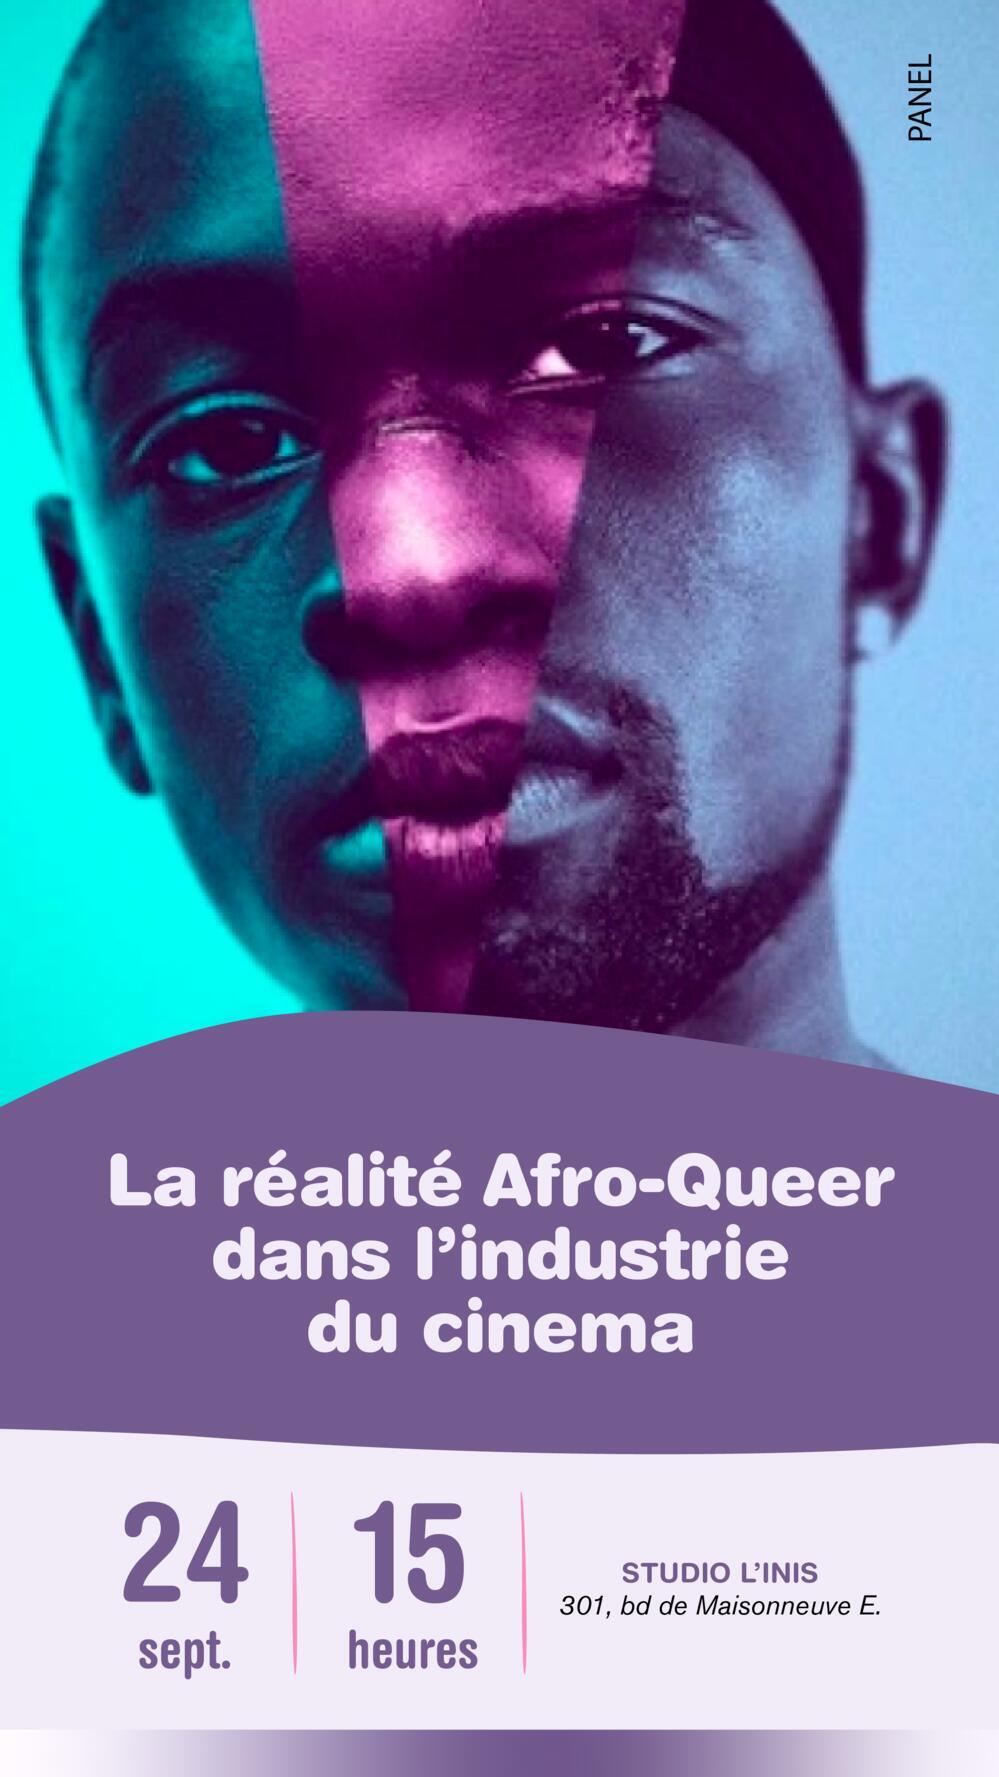 Panel #2 Afro-Queer Reality in the Film Industry